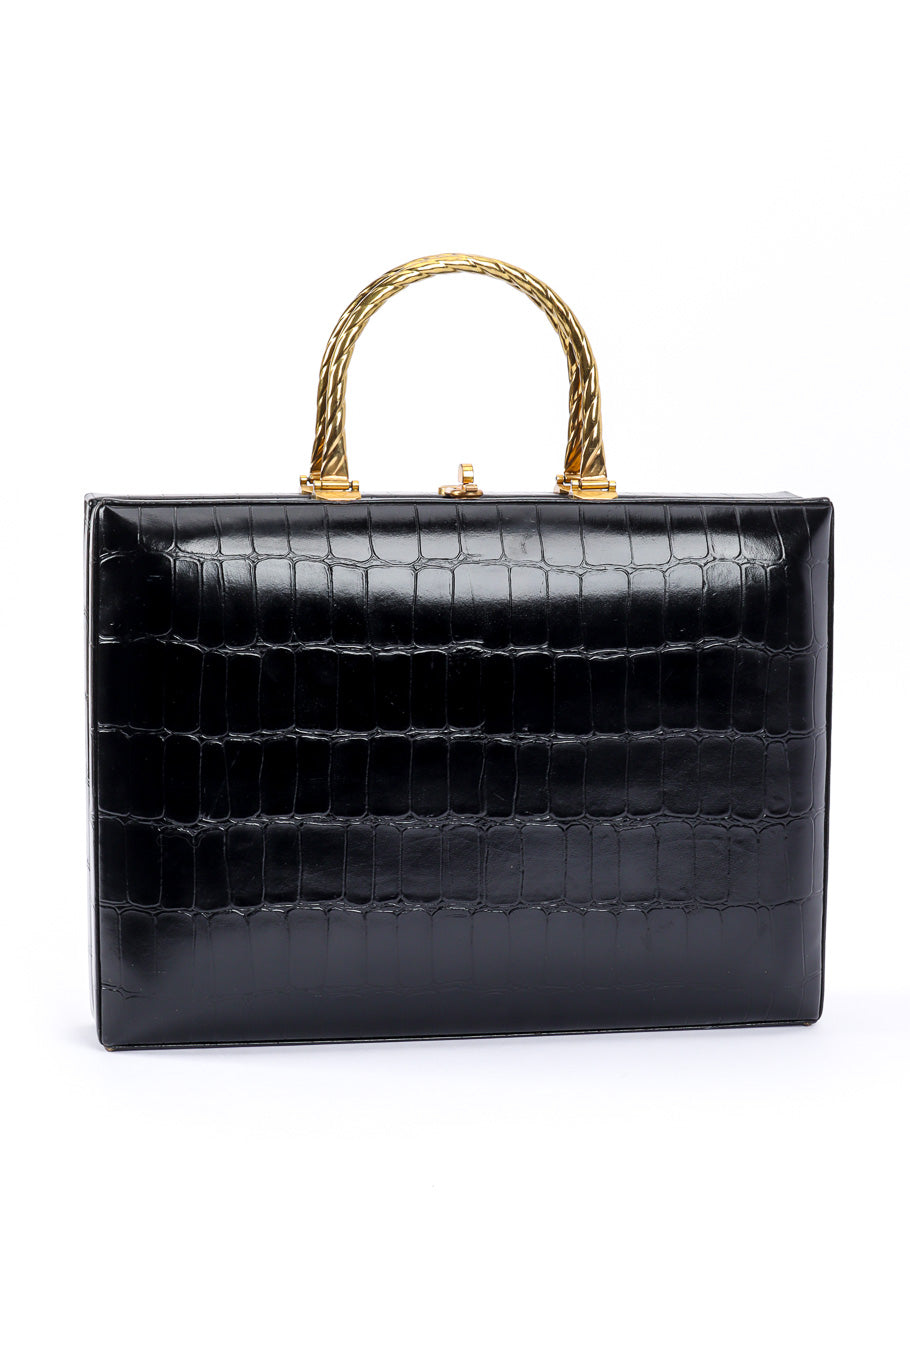 Reptile Zipperette Box Bag by Murray Kruger on white background @recessla